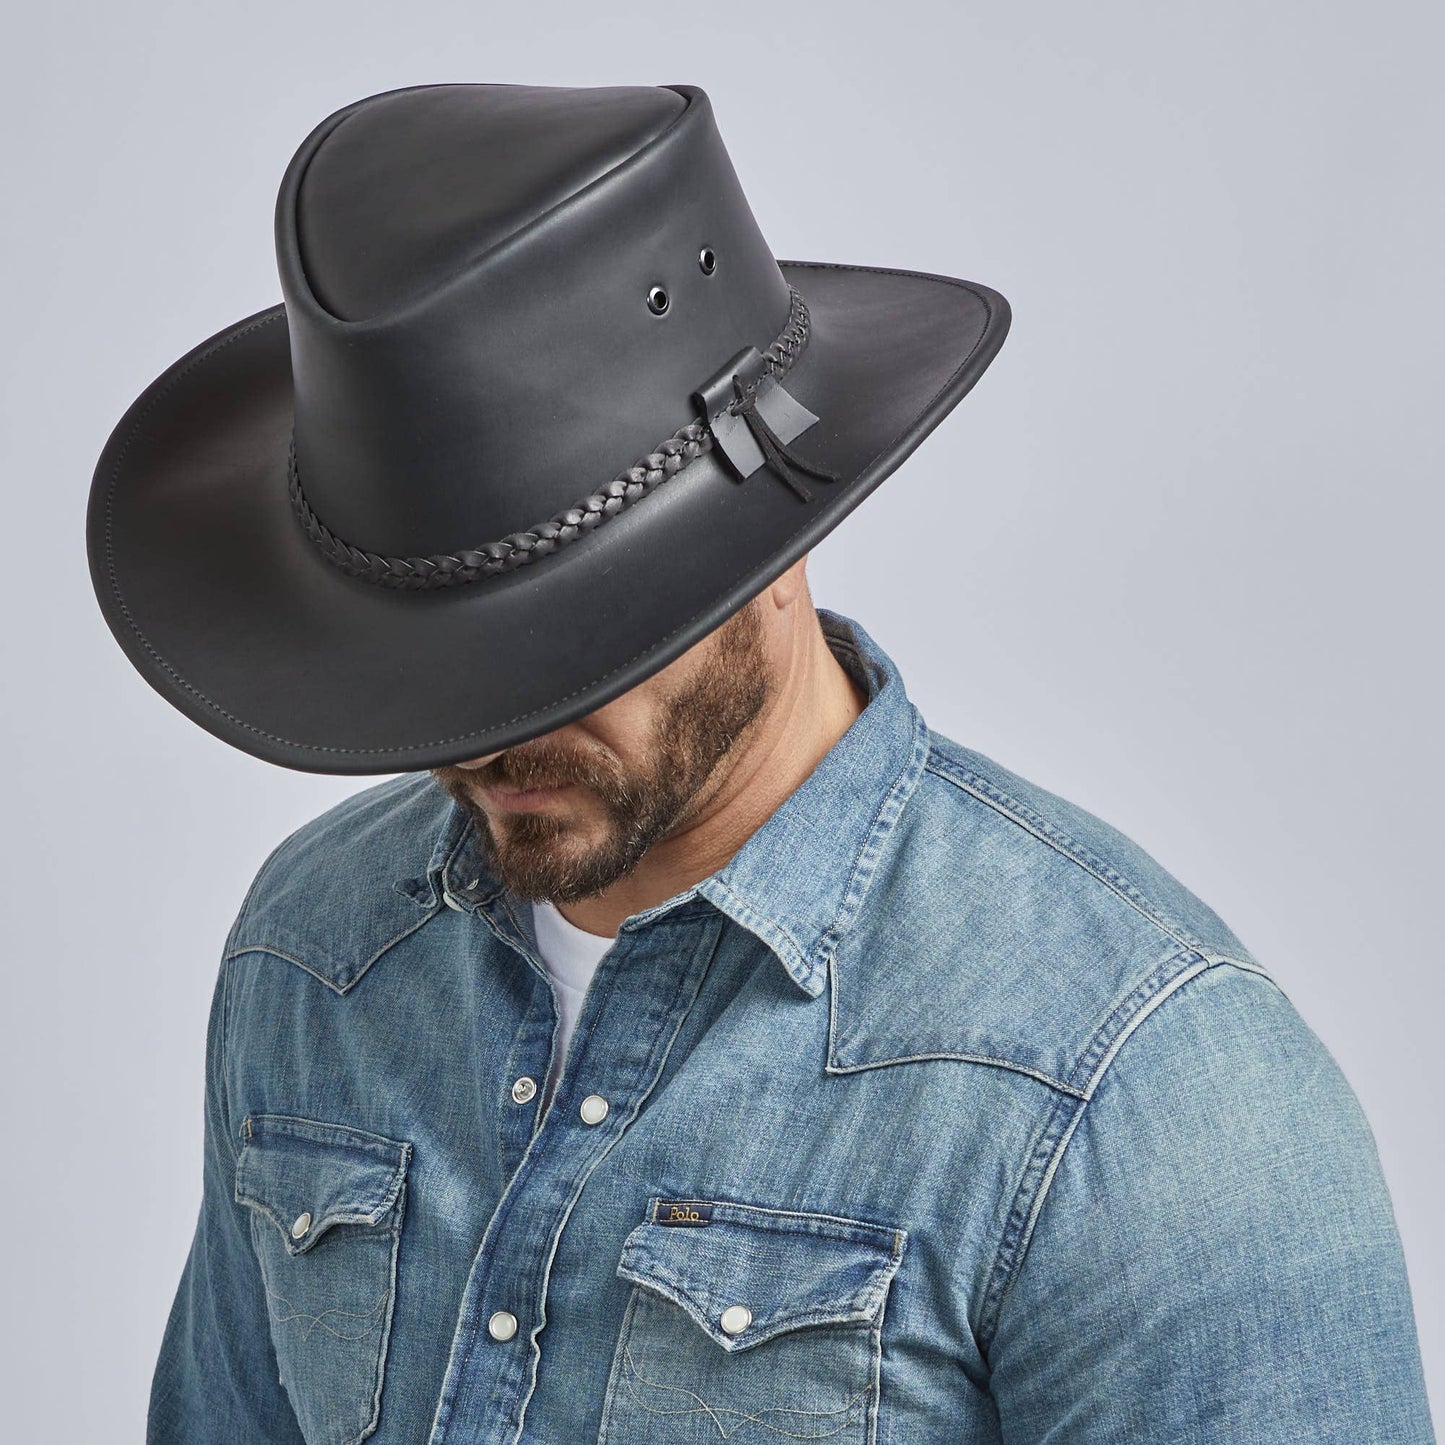 Bushman - Mens Outback Leather Hat